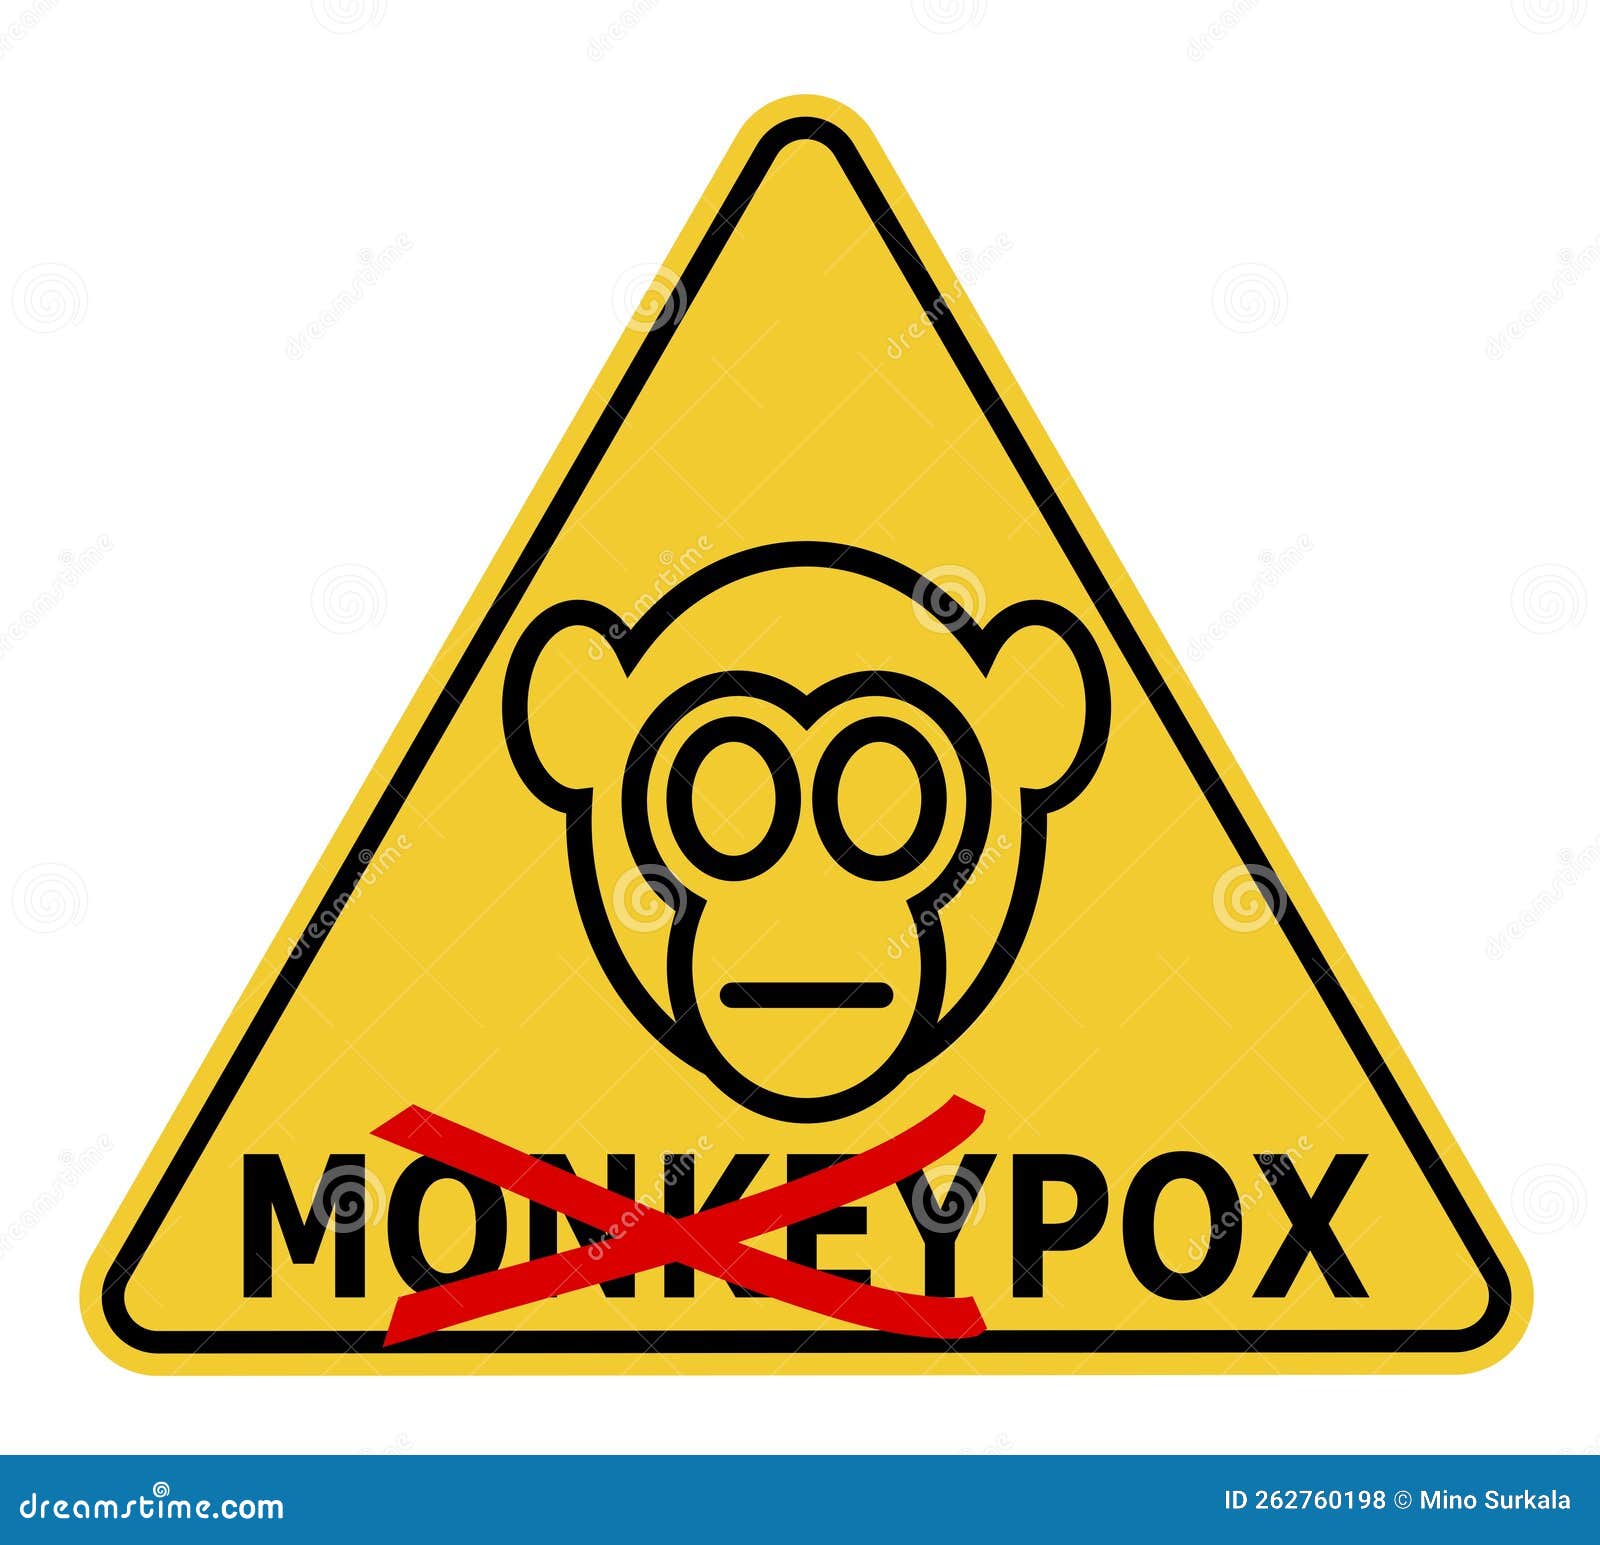   of warning sign against monkeypox virus renamed to mpox with crossed part of the word